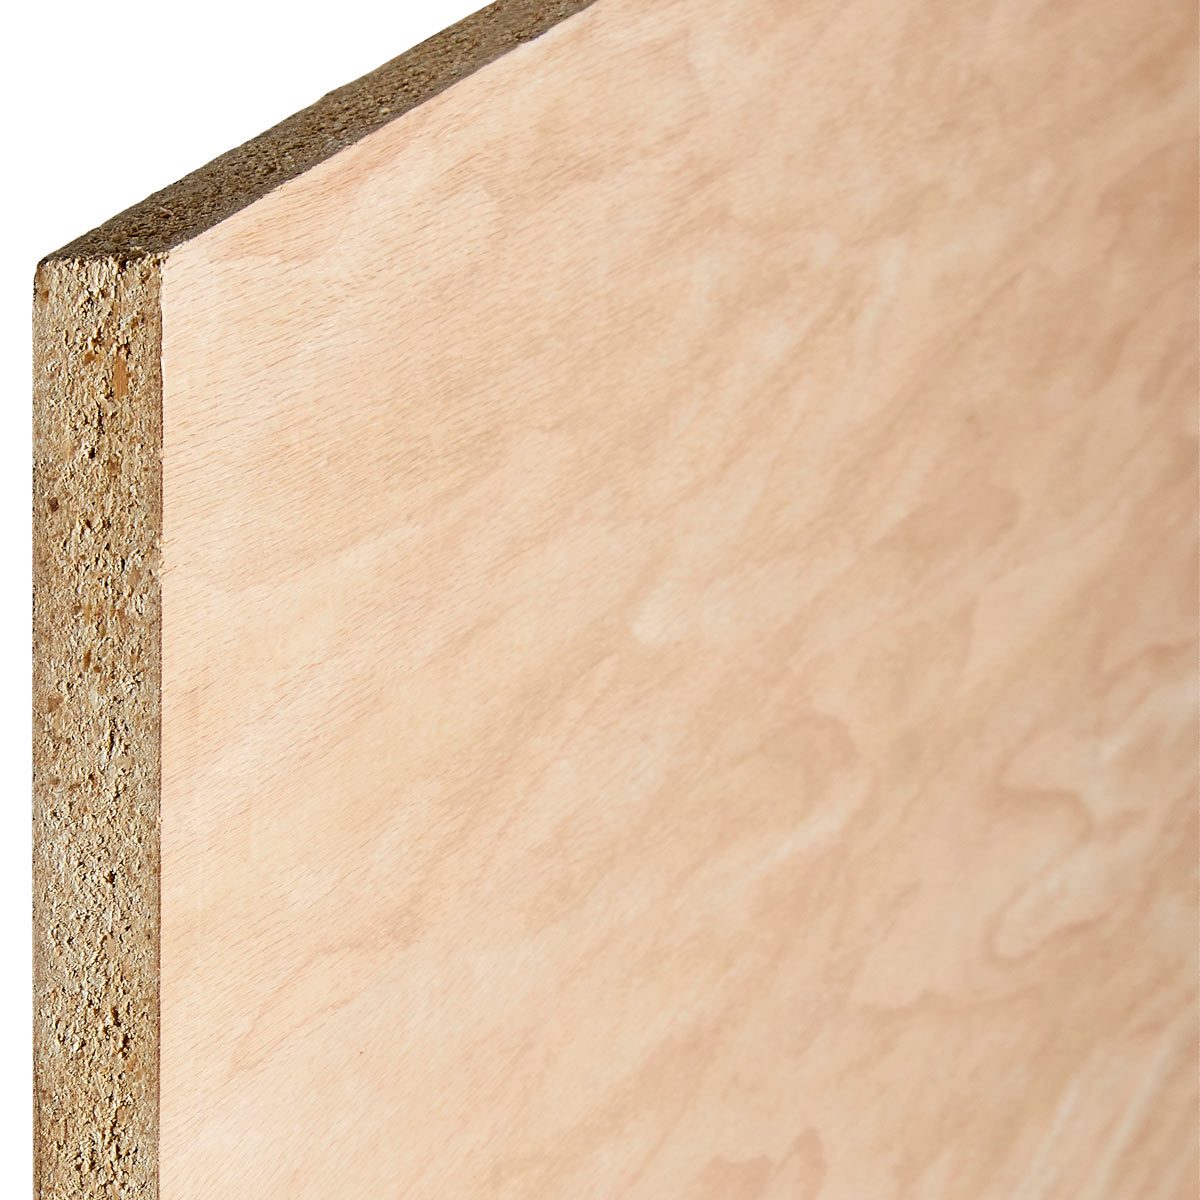 particleboard core plywood for garage cabinetry 